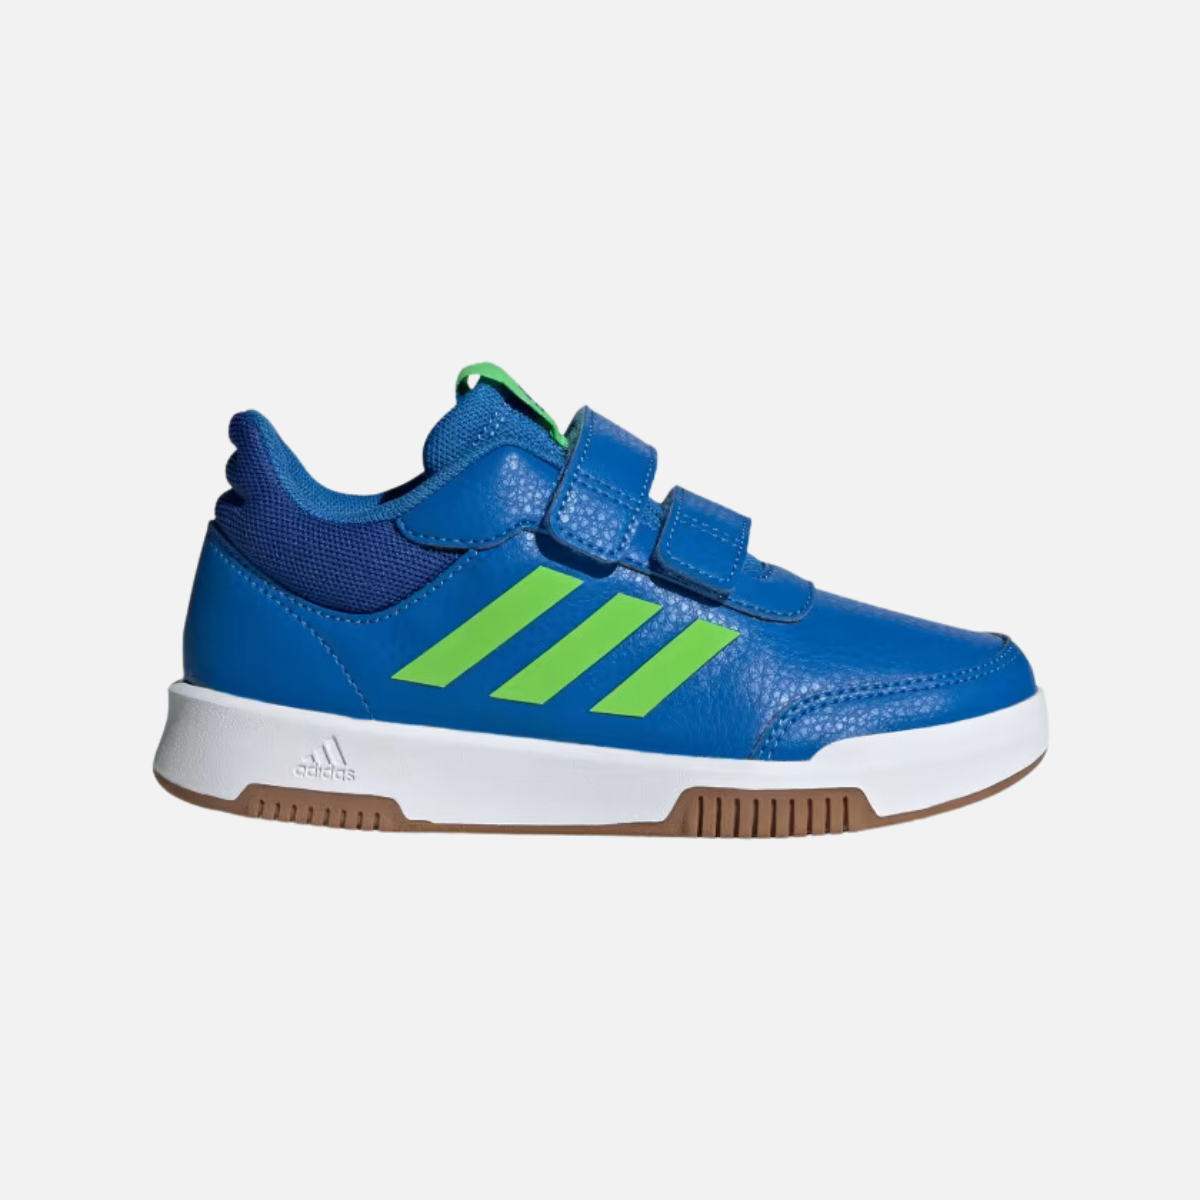 Adidas Tensaur Hook And Loop Kids Unisex Shoes (4-7 YEAR) -Bright Royal/Lucid Lime/Royal Blue